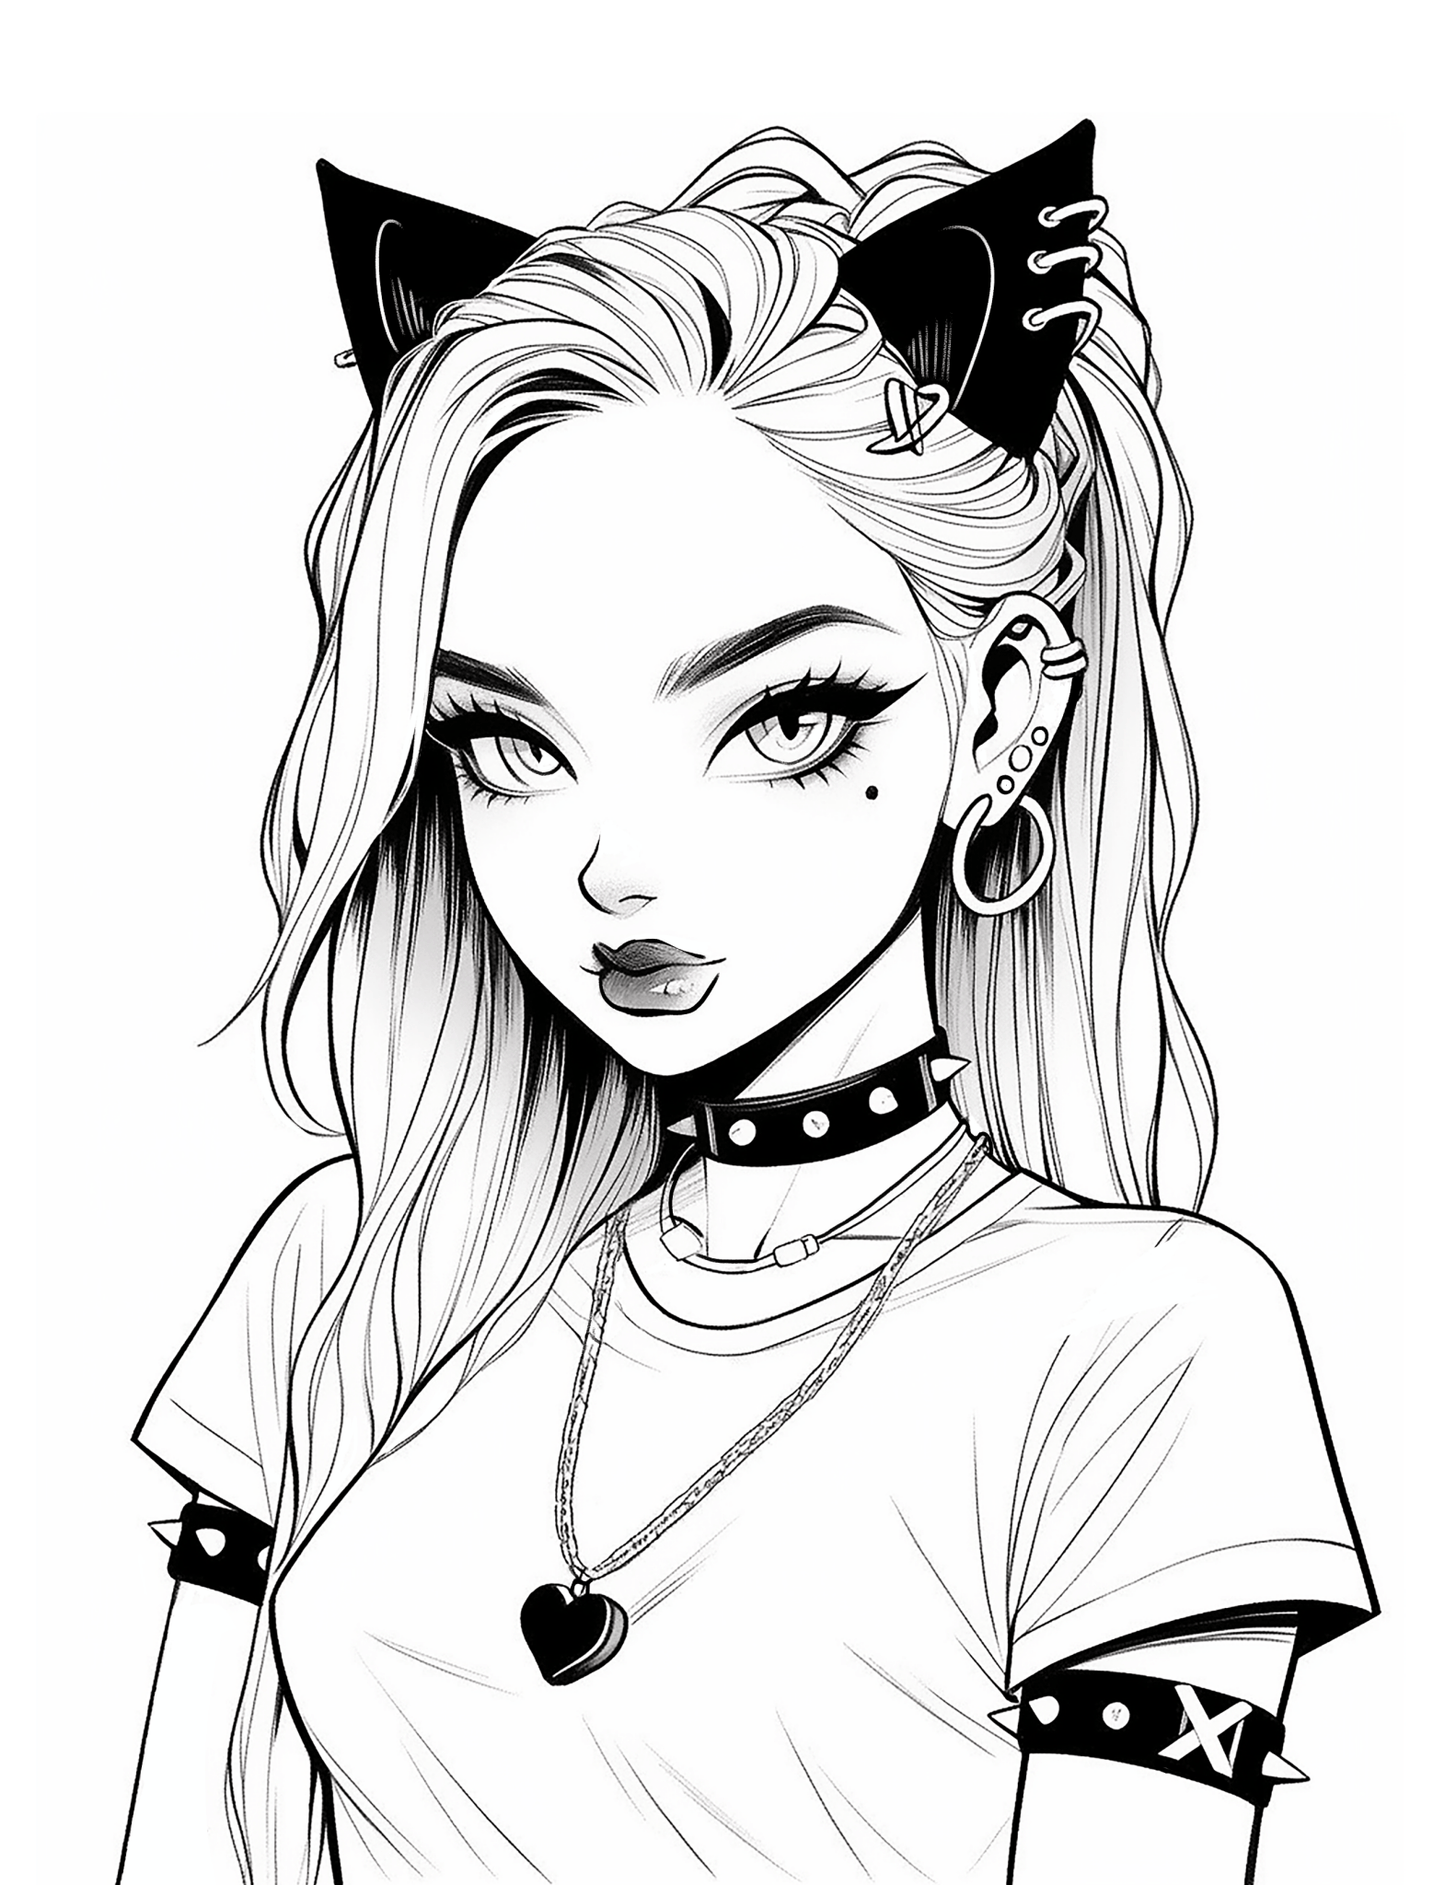 Gothic Emo Girls Digital Coloring Book Puppy's Aesthetics